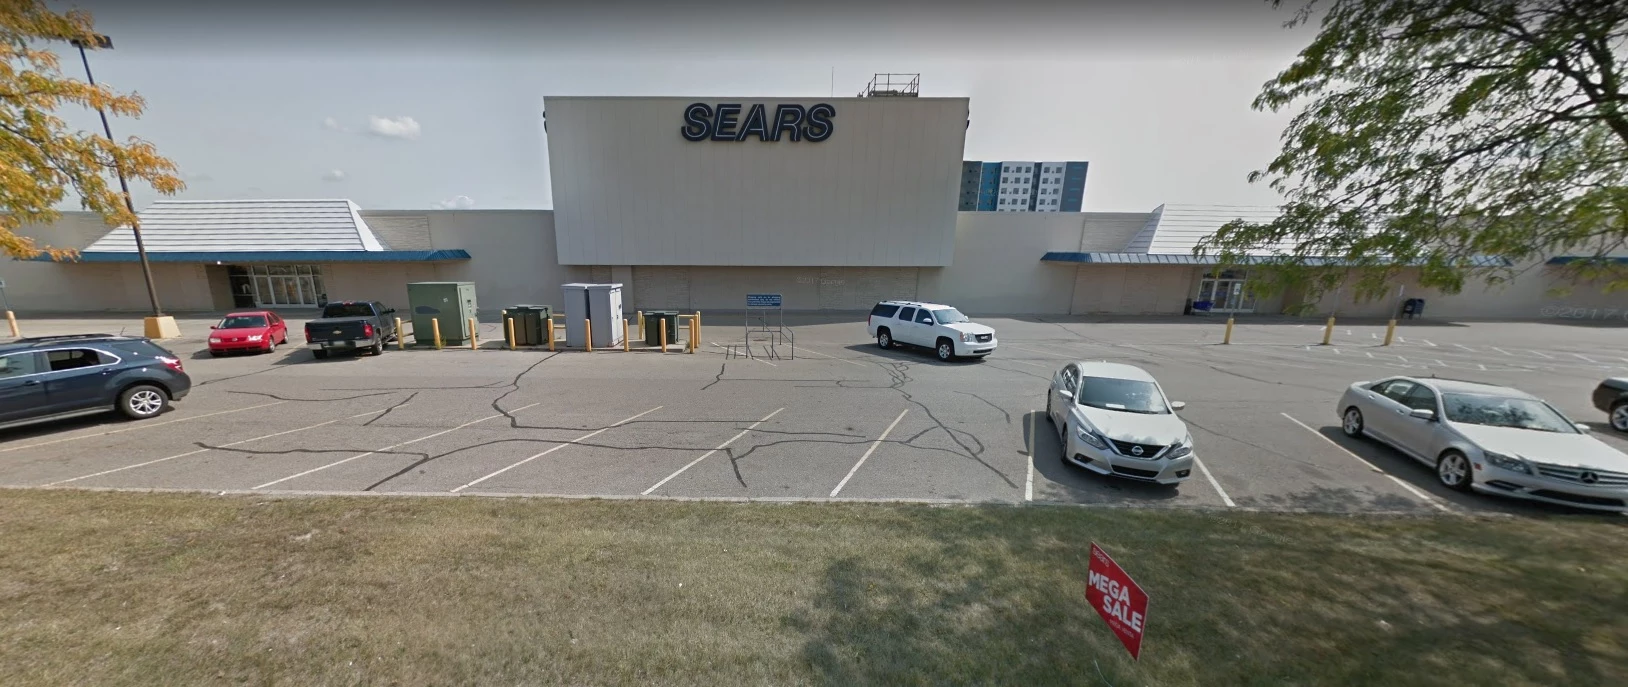 Could The Sears Lot In Frandor Be Headed For A Major Makeover?